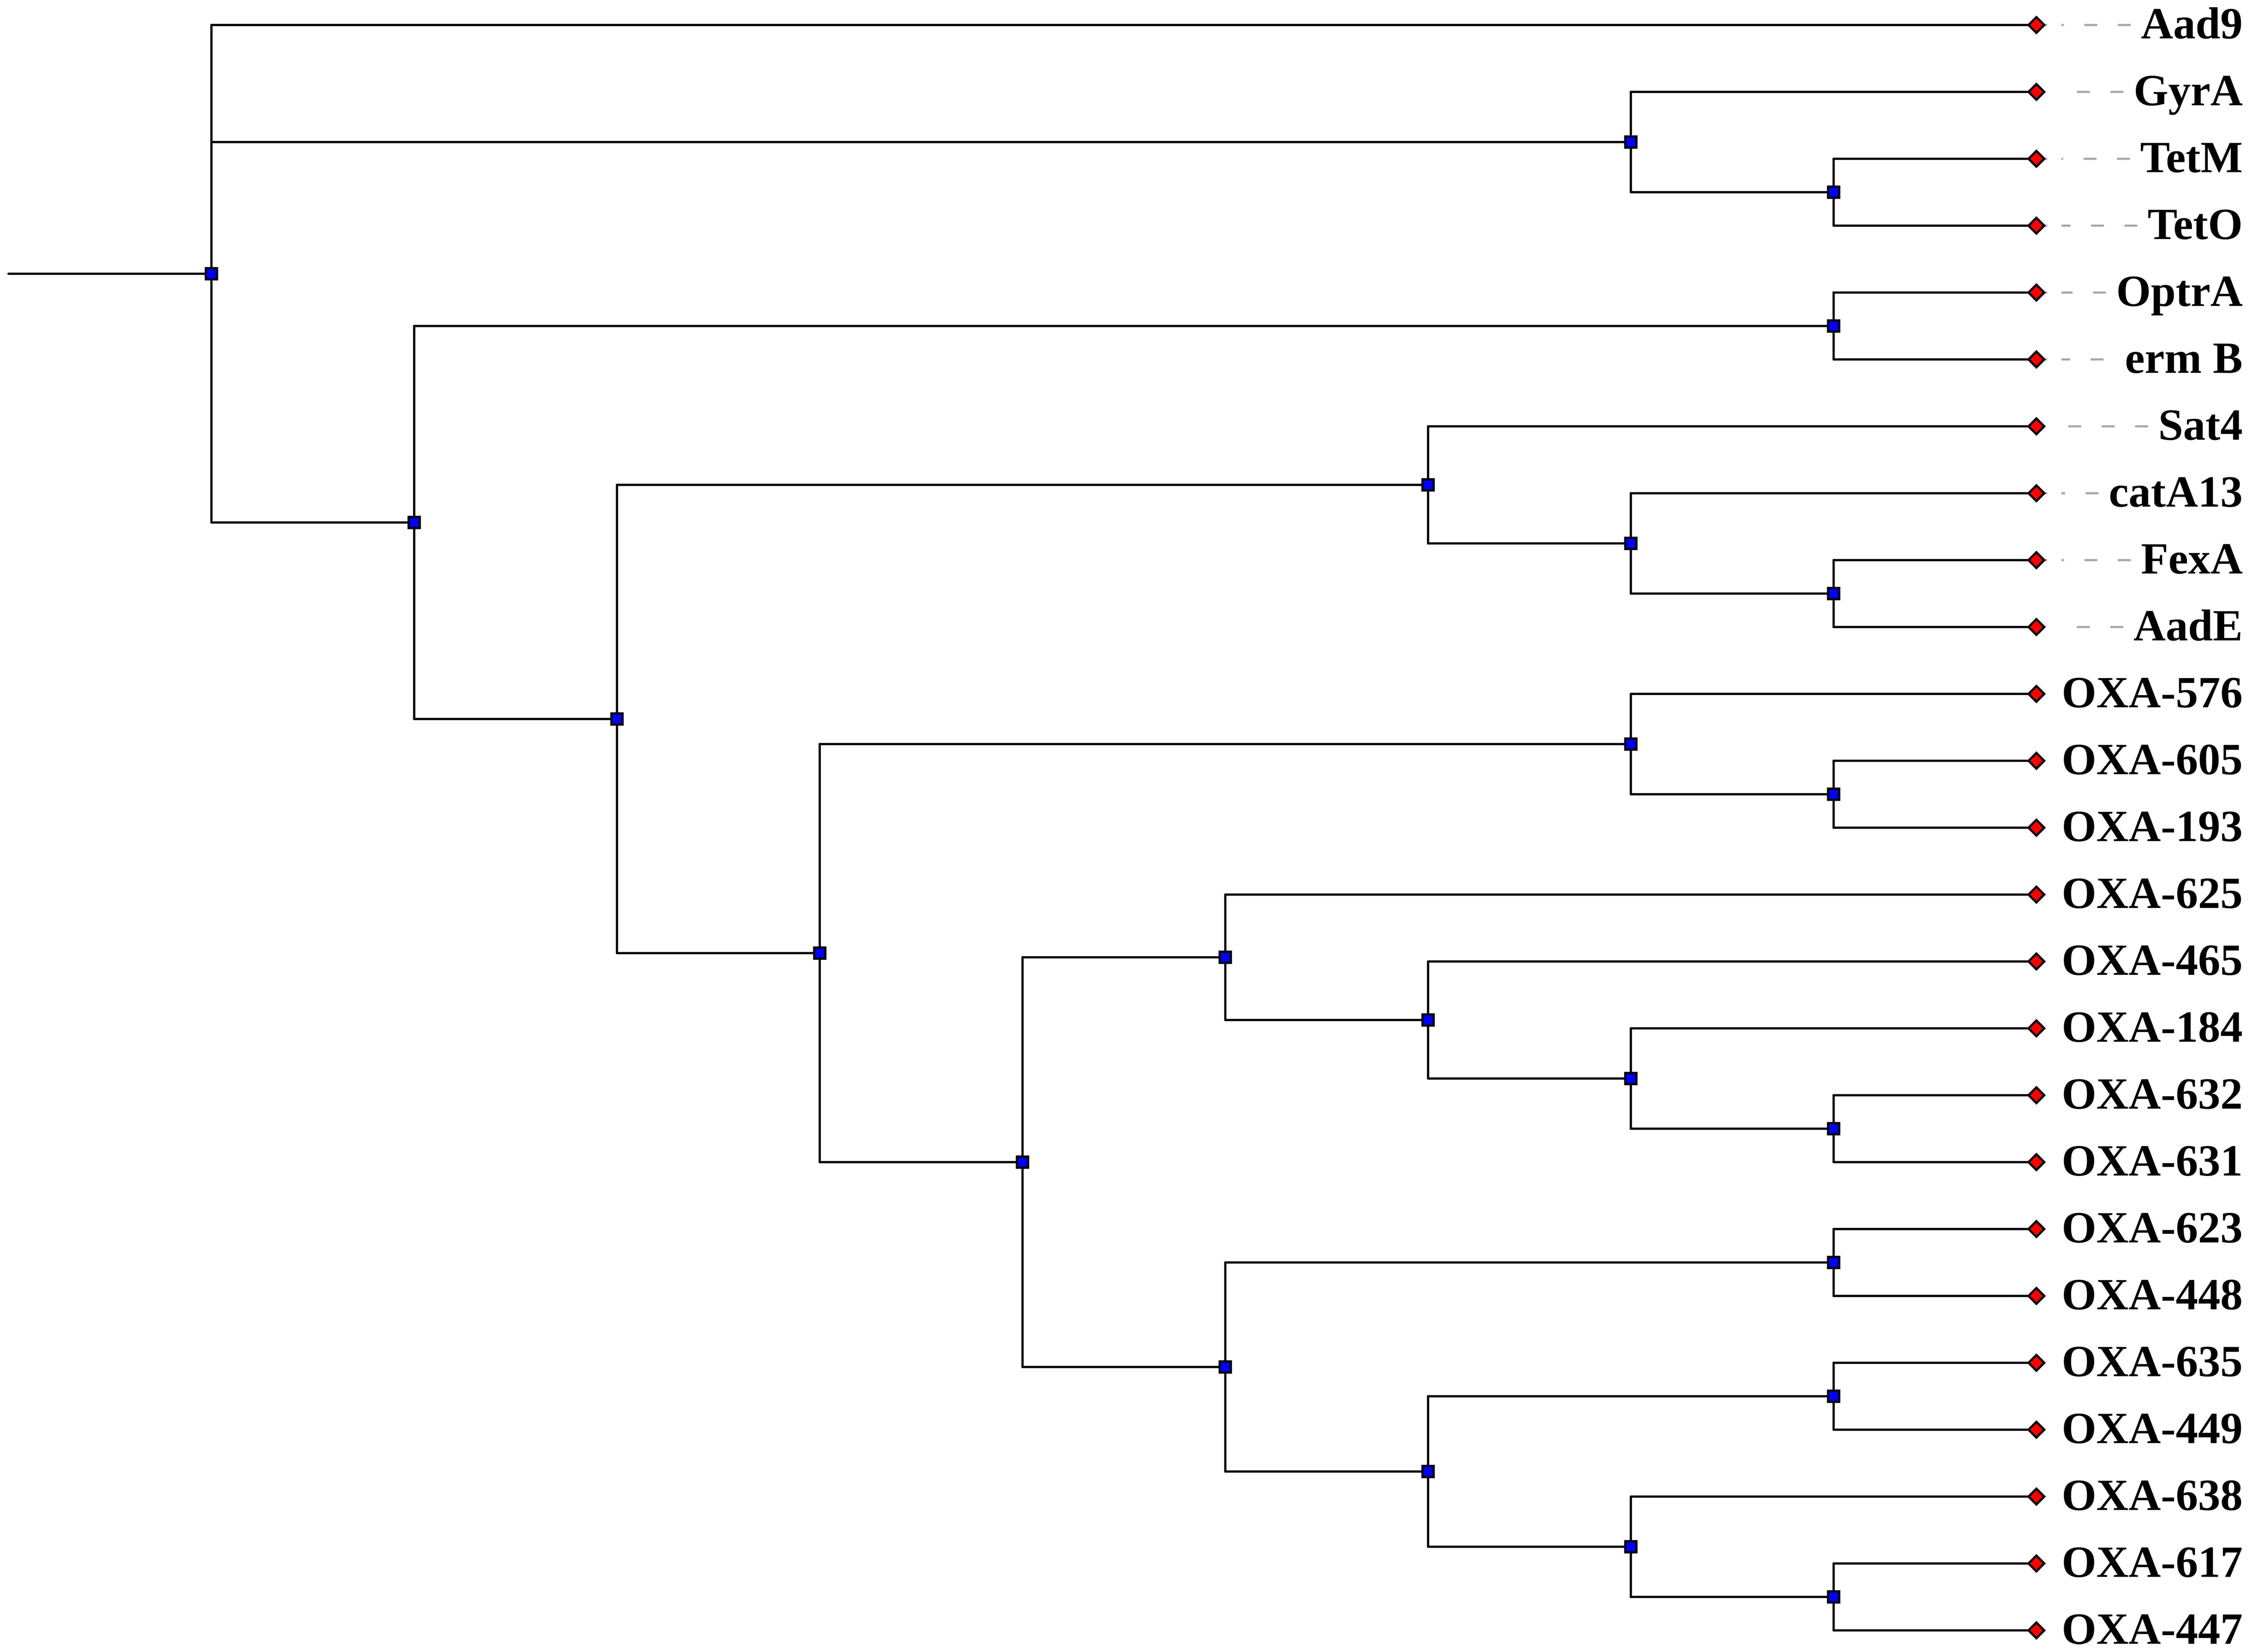 Schematic depiction of the rooted phylogenetic tree for the 25 genomic sequences for <italic>C. jejuni</italic> strains using the MAFFT (Multiple Alignment using Fast Fourier Transform).